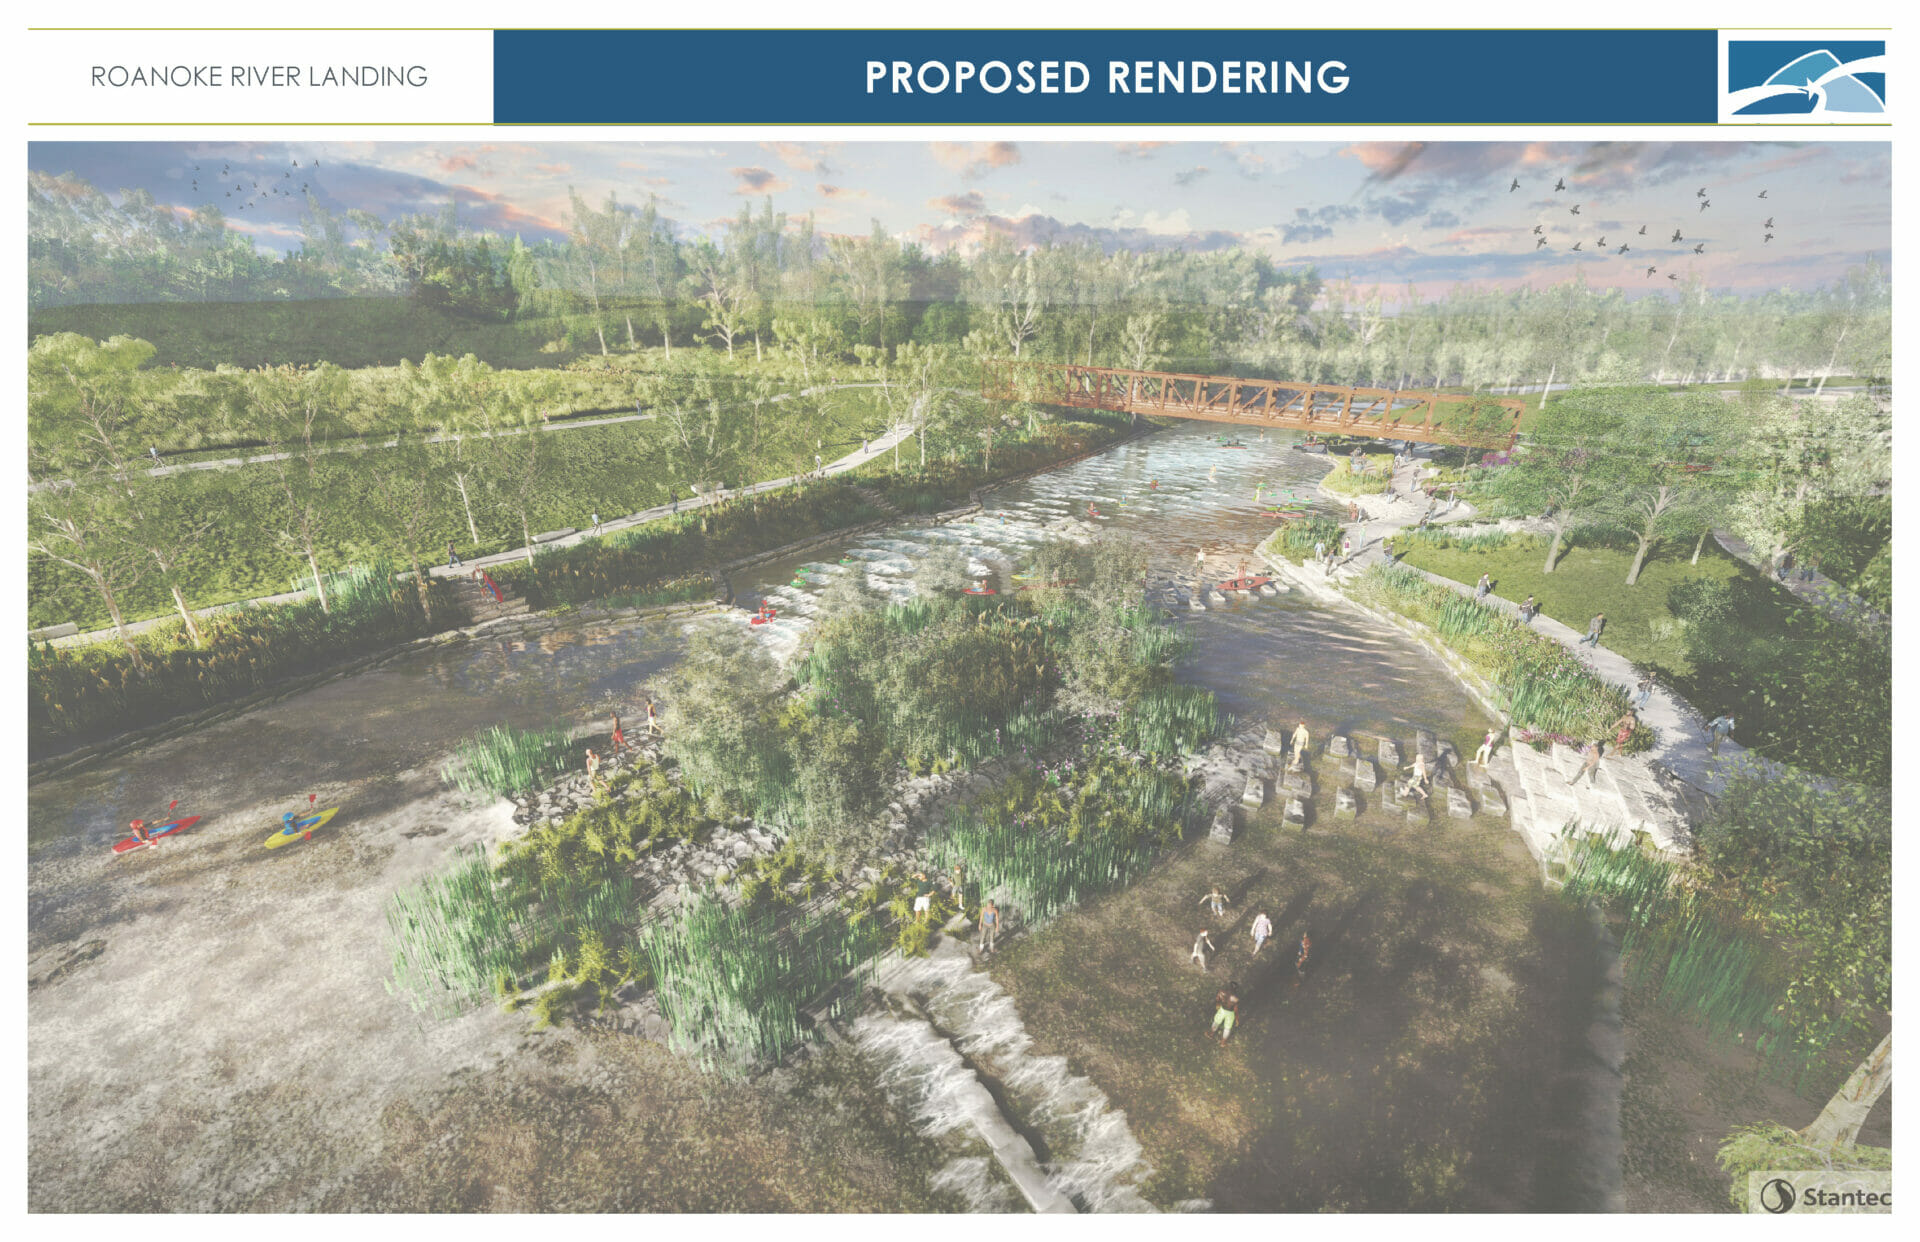 In River Park Proposed Rendering